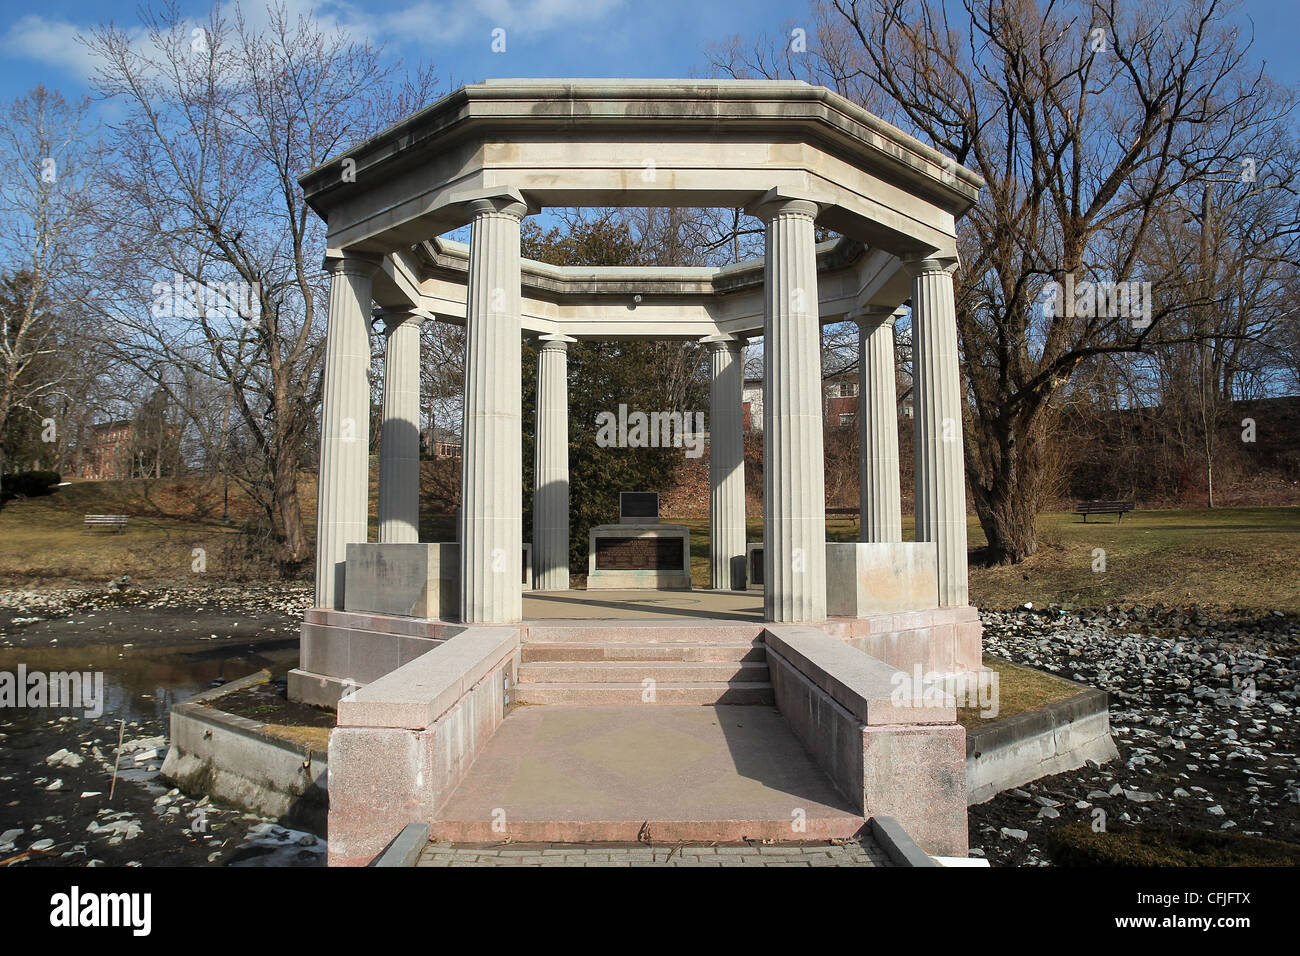 The War Memorial, built in 1932 to honor veterans of World War I, in Congress Park, Saratoga Springs Stock Photo